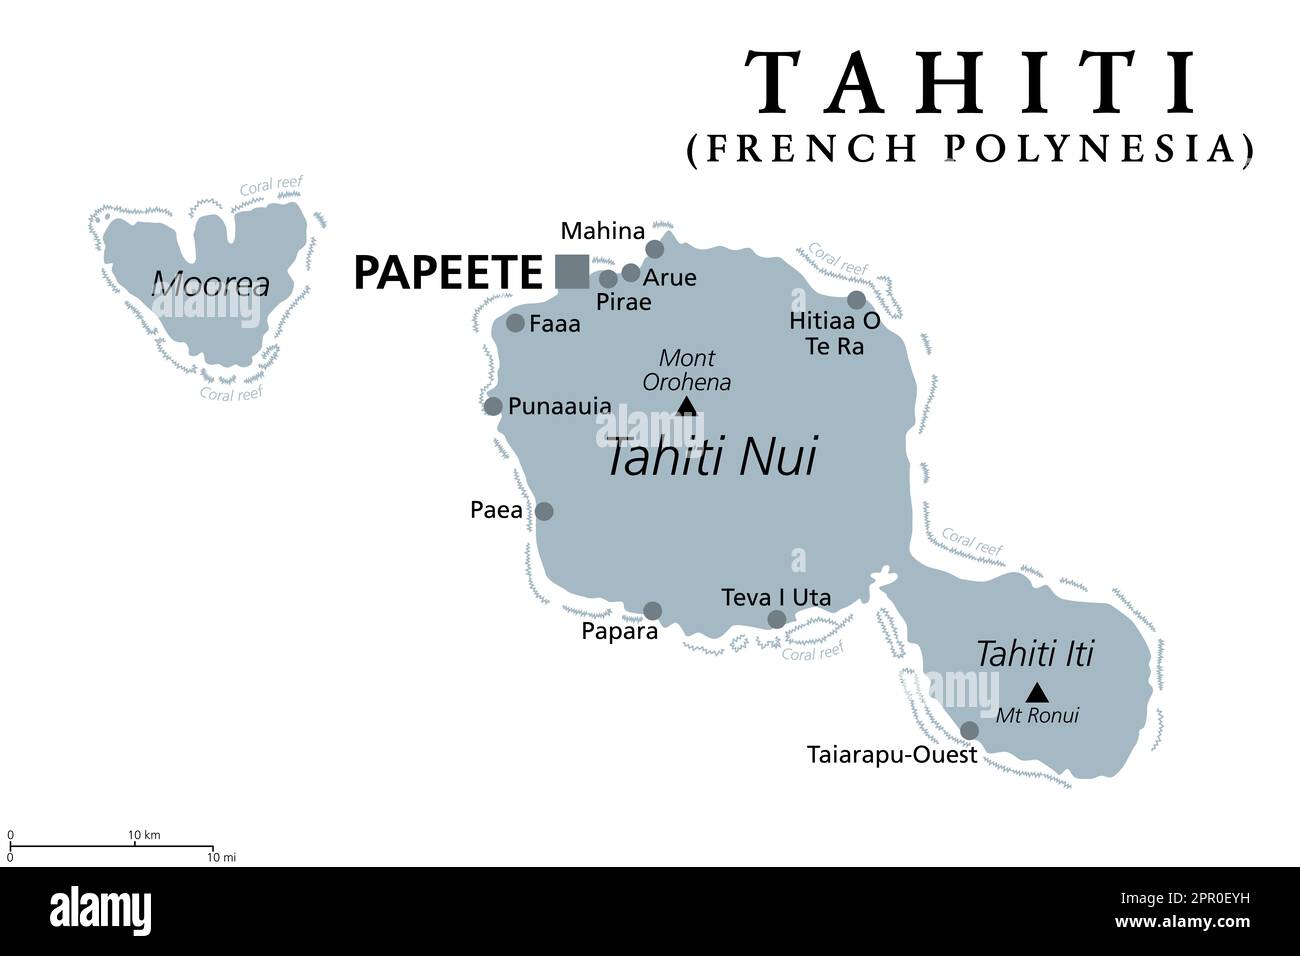 Tahiti, French Polynesia, gray political map. Largest island of the Windward group of the Society Islands, with capital Papeete. Stock Photo